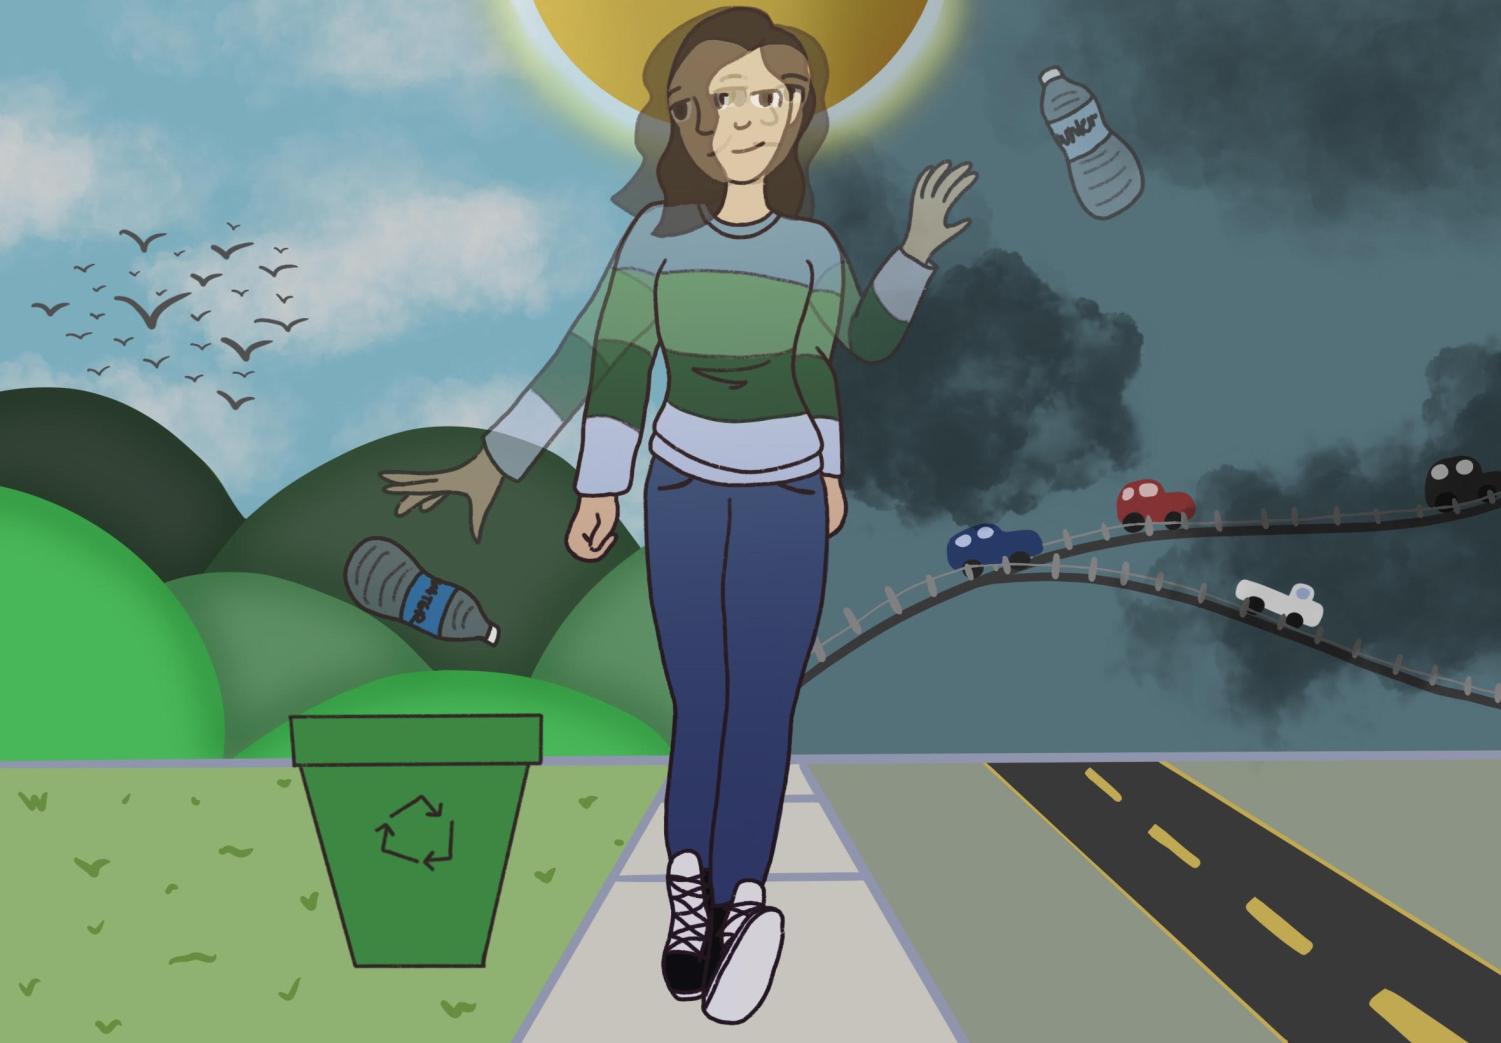 A girl is shown throwing a bottle away in both a clean and polluted environment